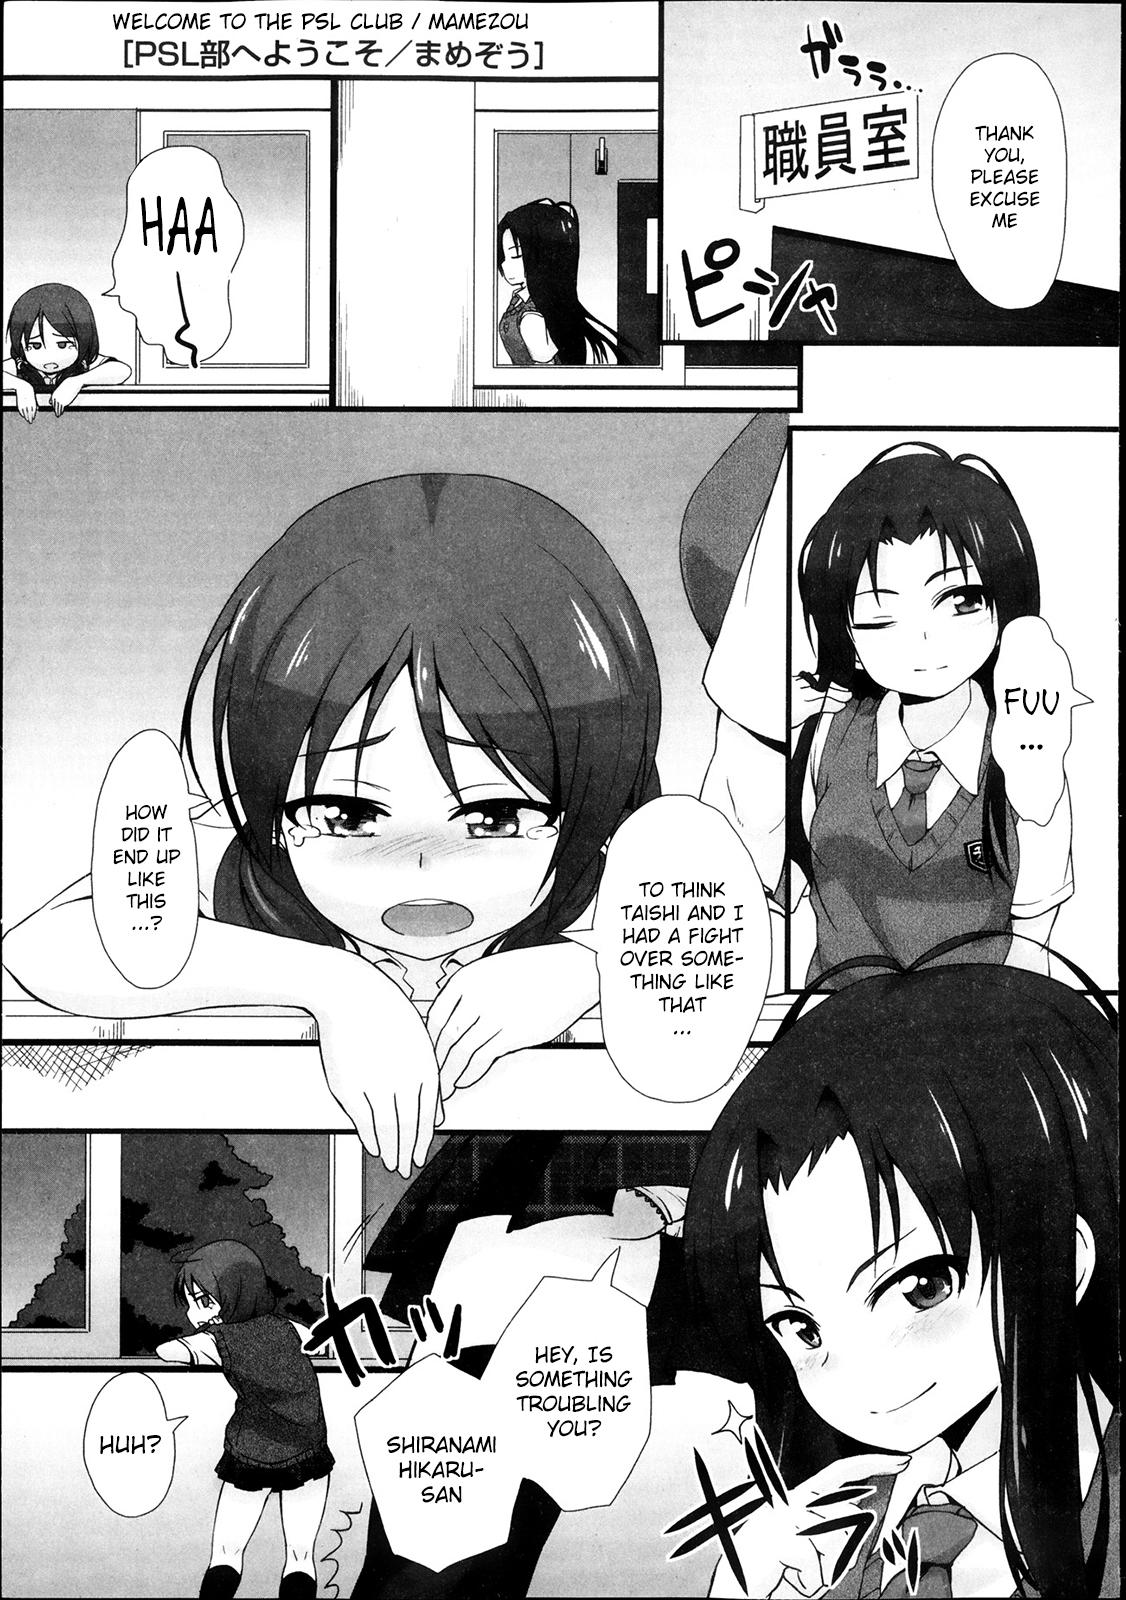 Free Rough Porn PSL-bu e Youkoso | Welcome to the PSL Club All Natural - Page 1